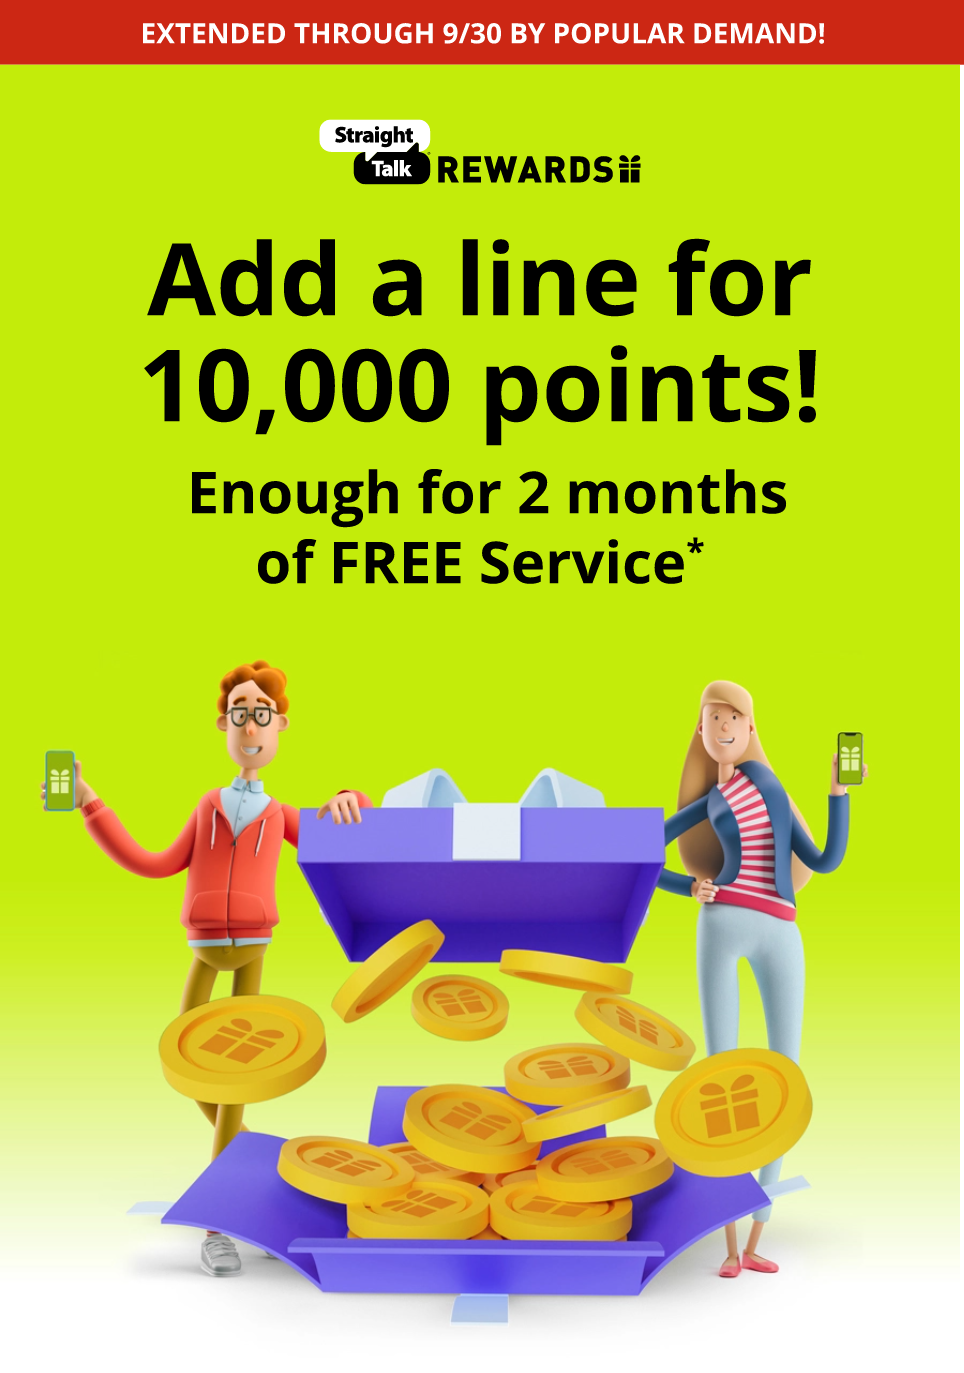 Add a line for 10,000 points